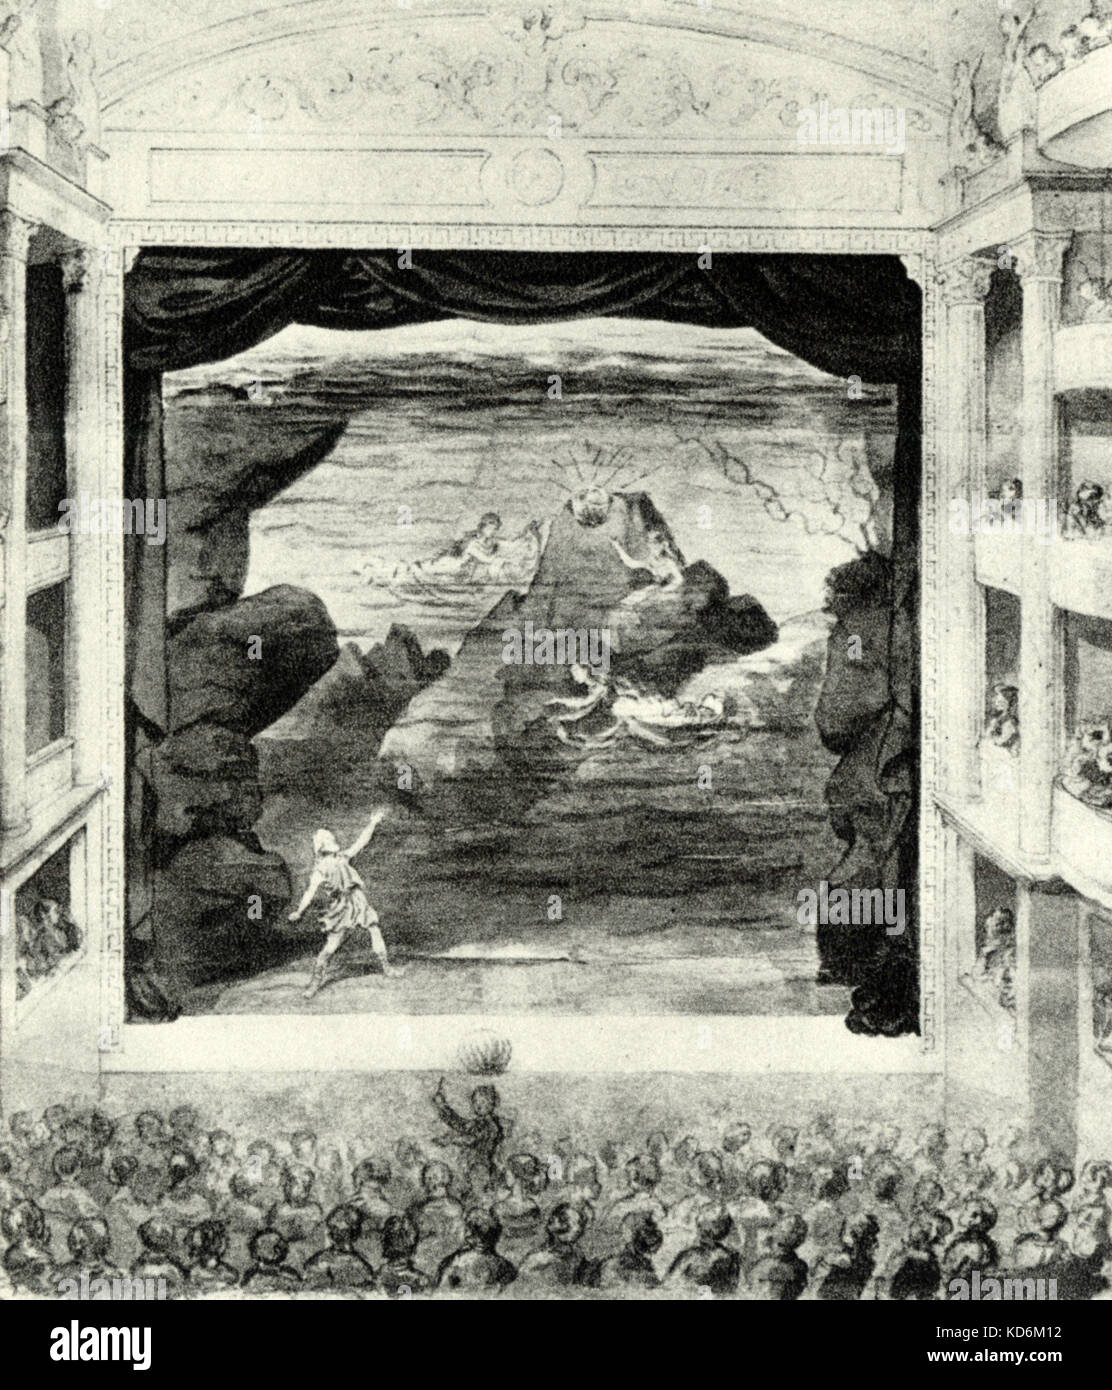 Wagner ' s Rheingold première in Munich in 1869. First picture published from production, after watercolour. Conducted by Wüllner. Ring des (The Ring of the Nibelung, Ring Cycle). Wagnerian tetralogy.